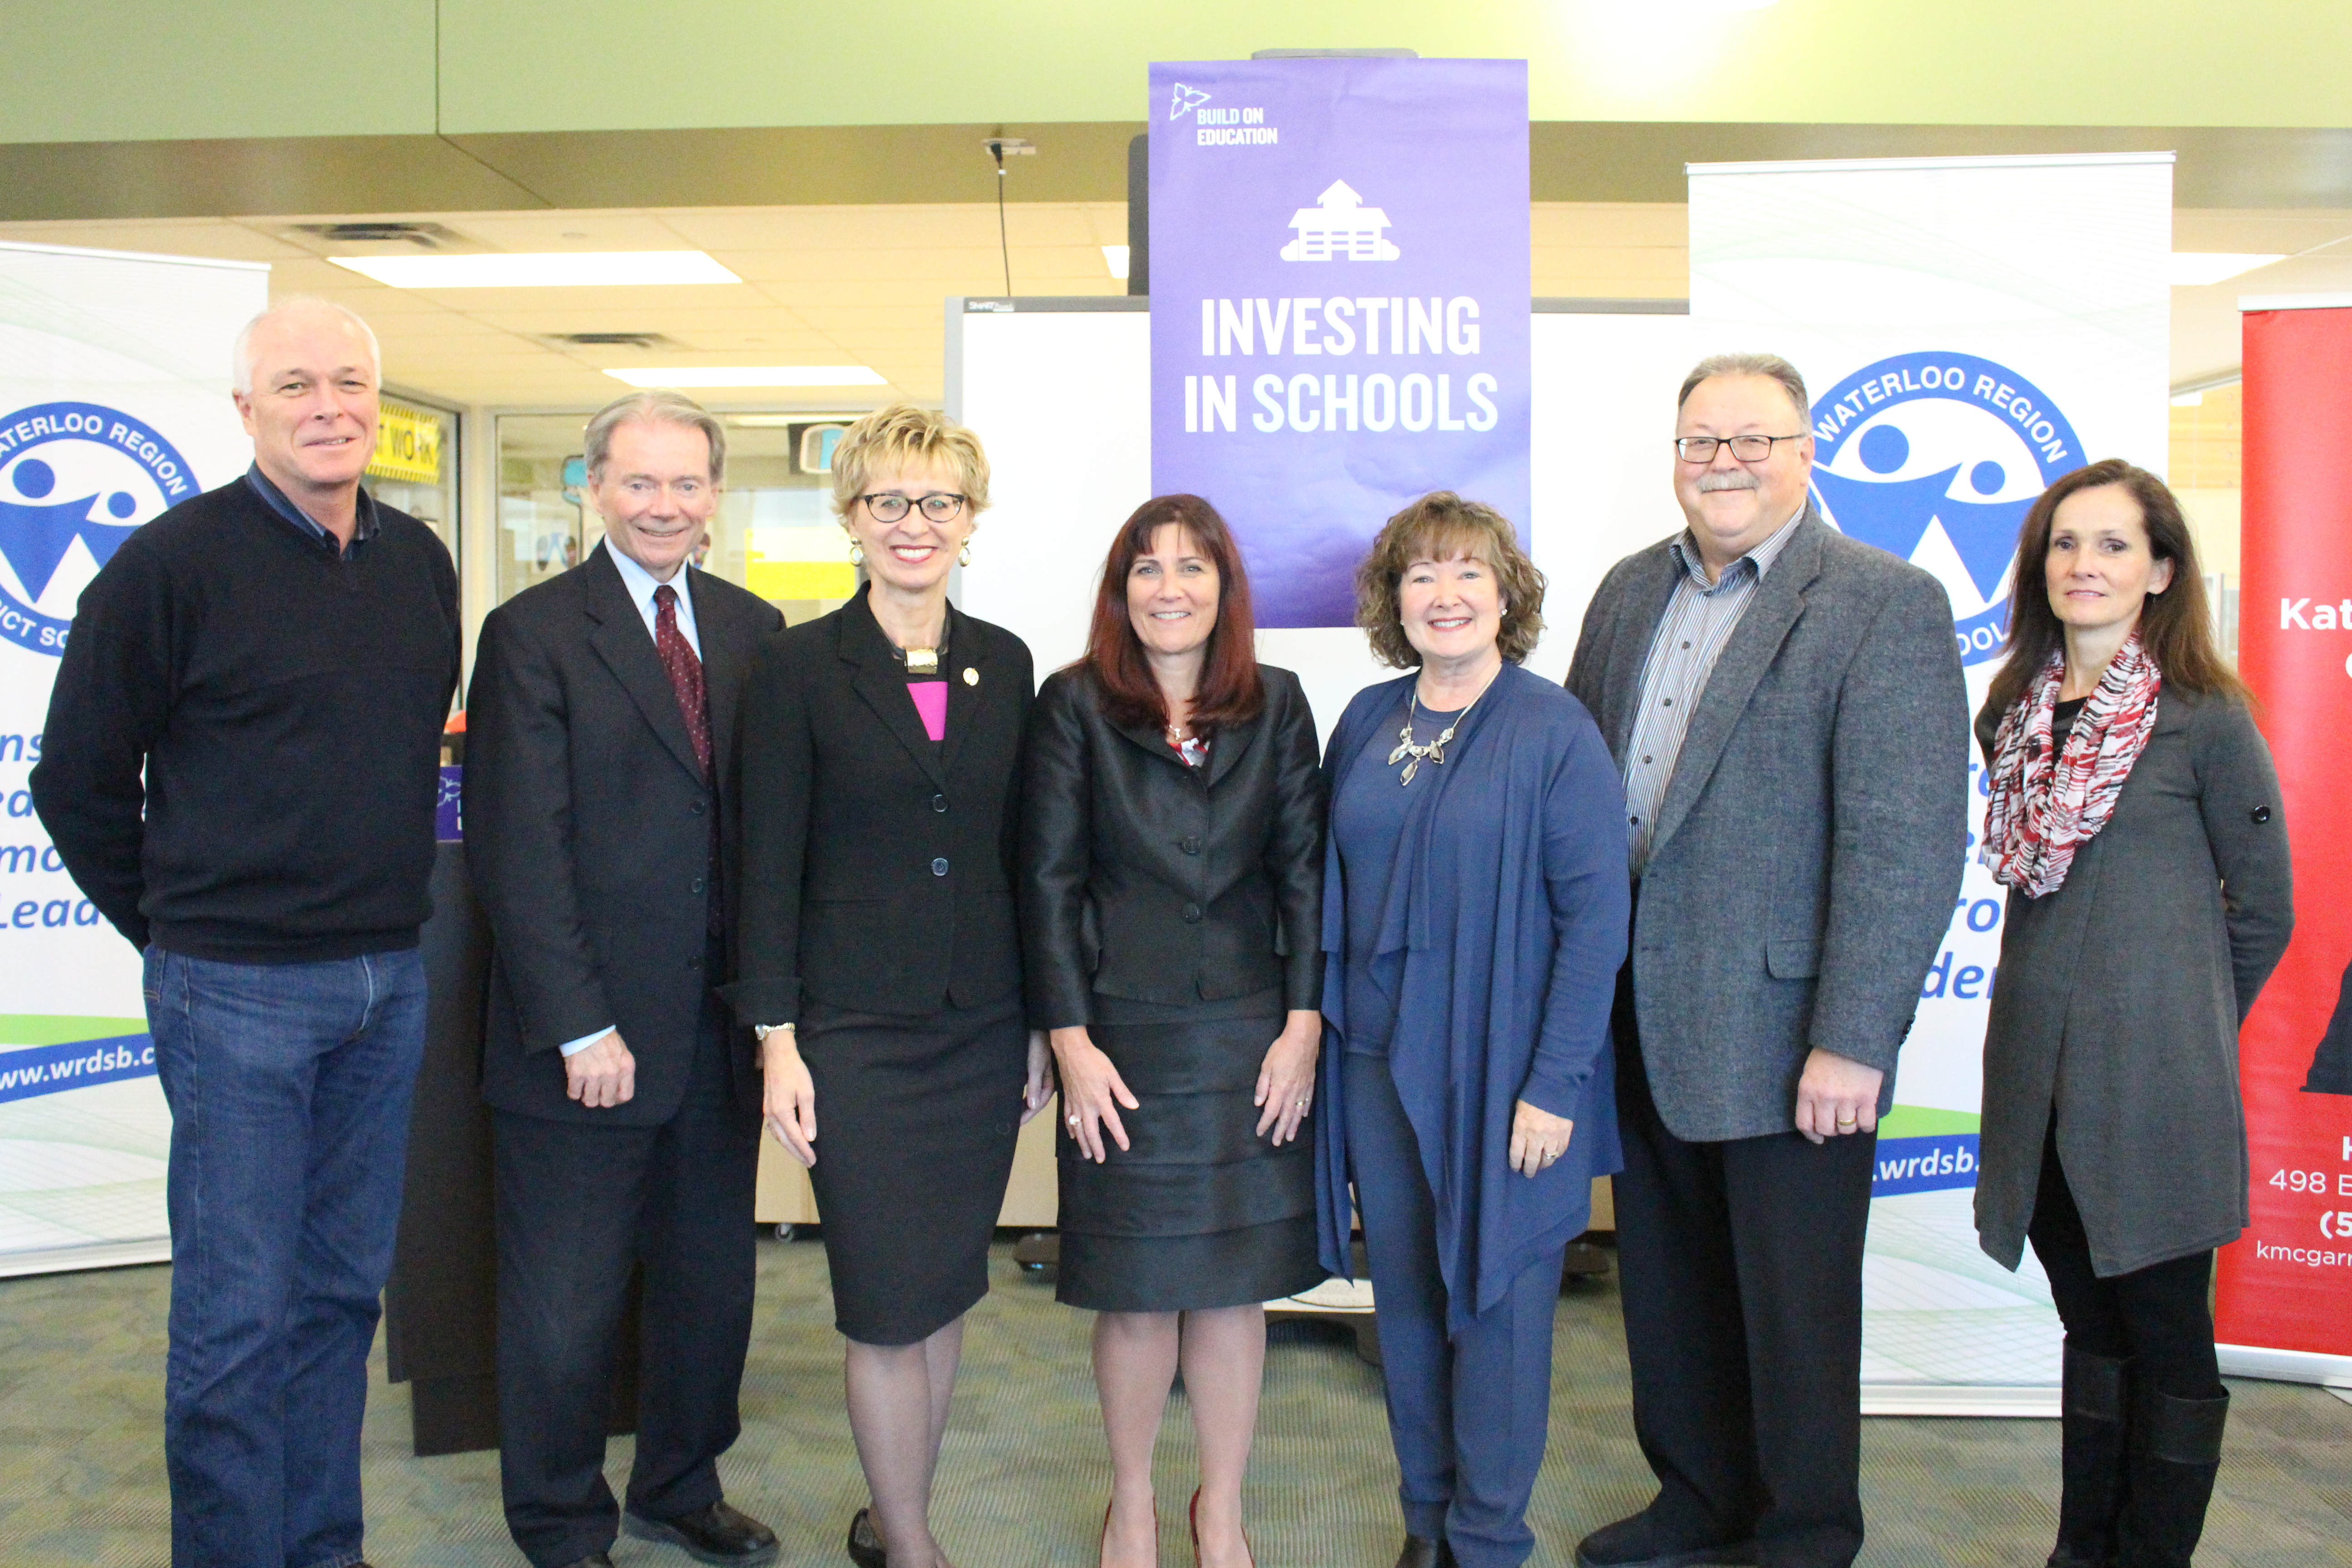 Local dignitaries at the funding announcement